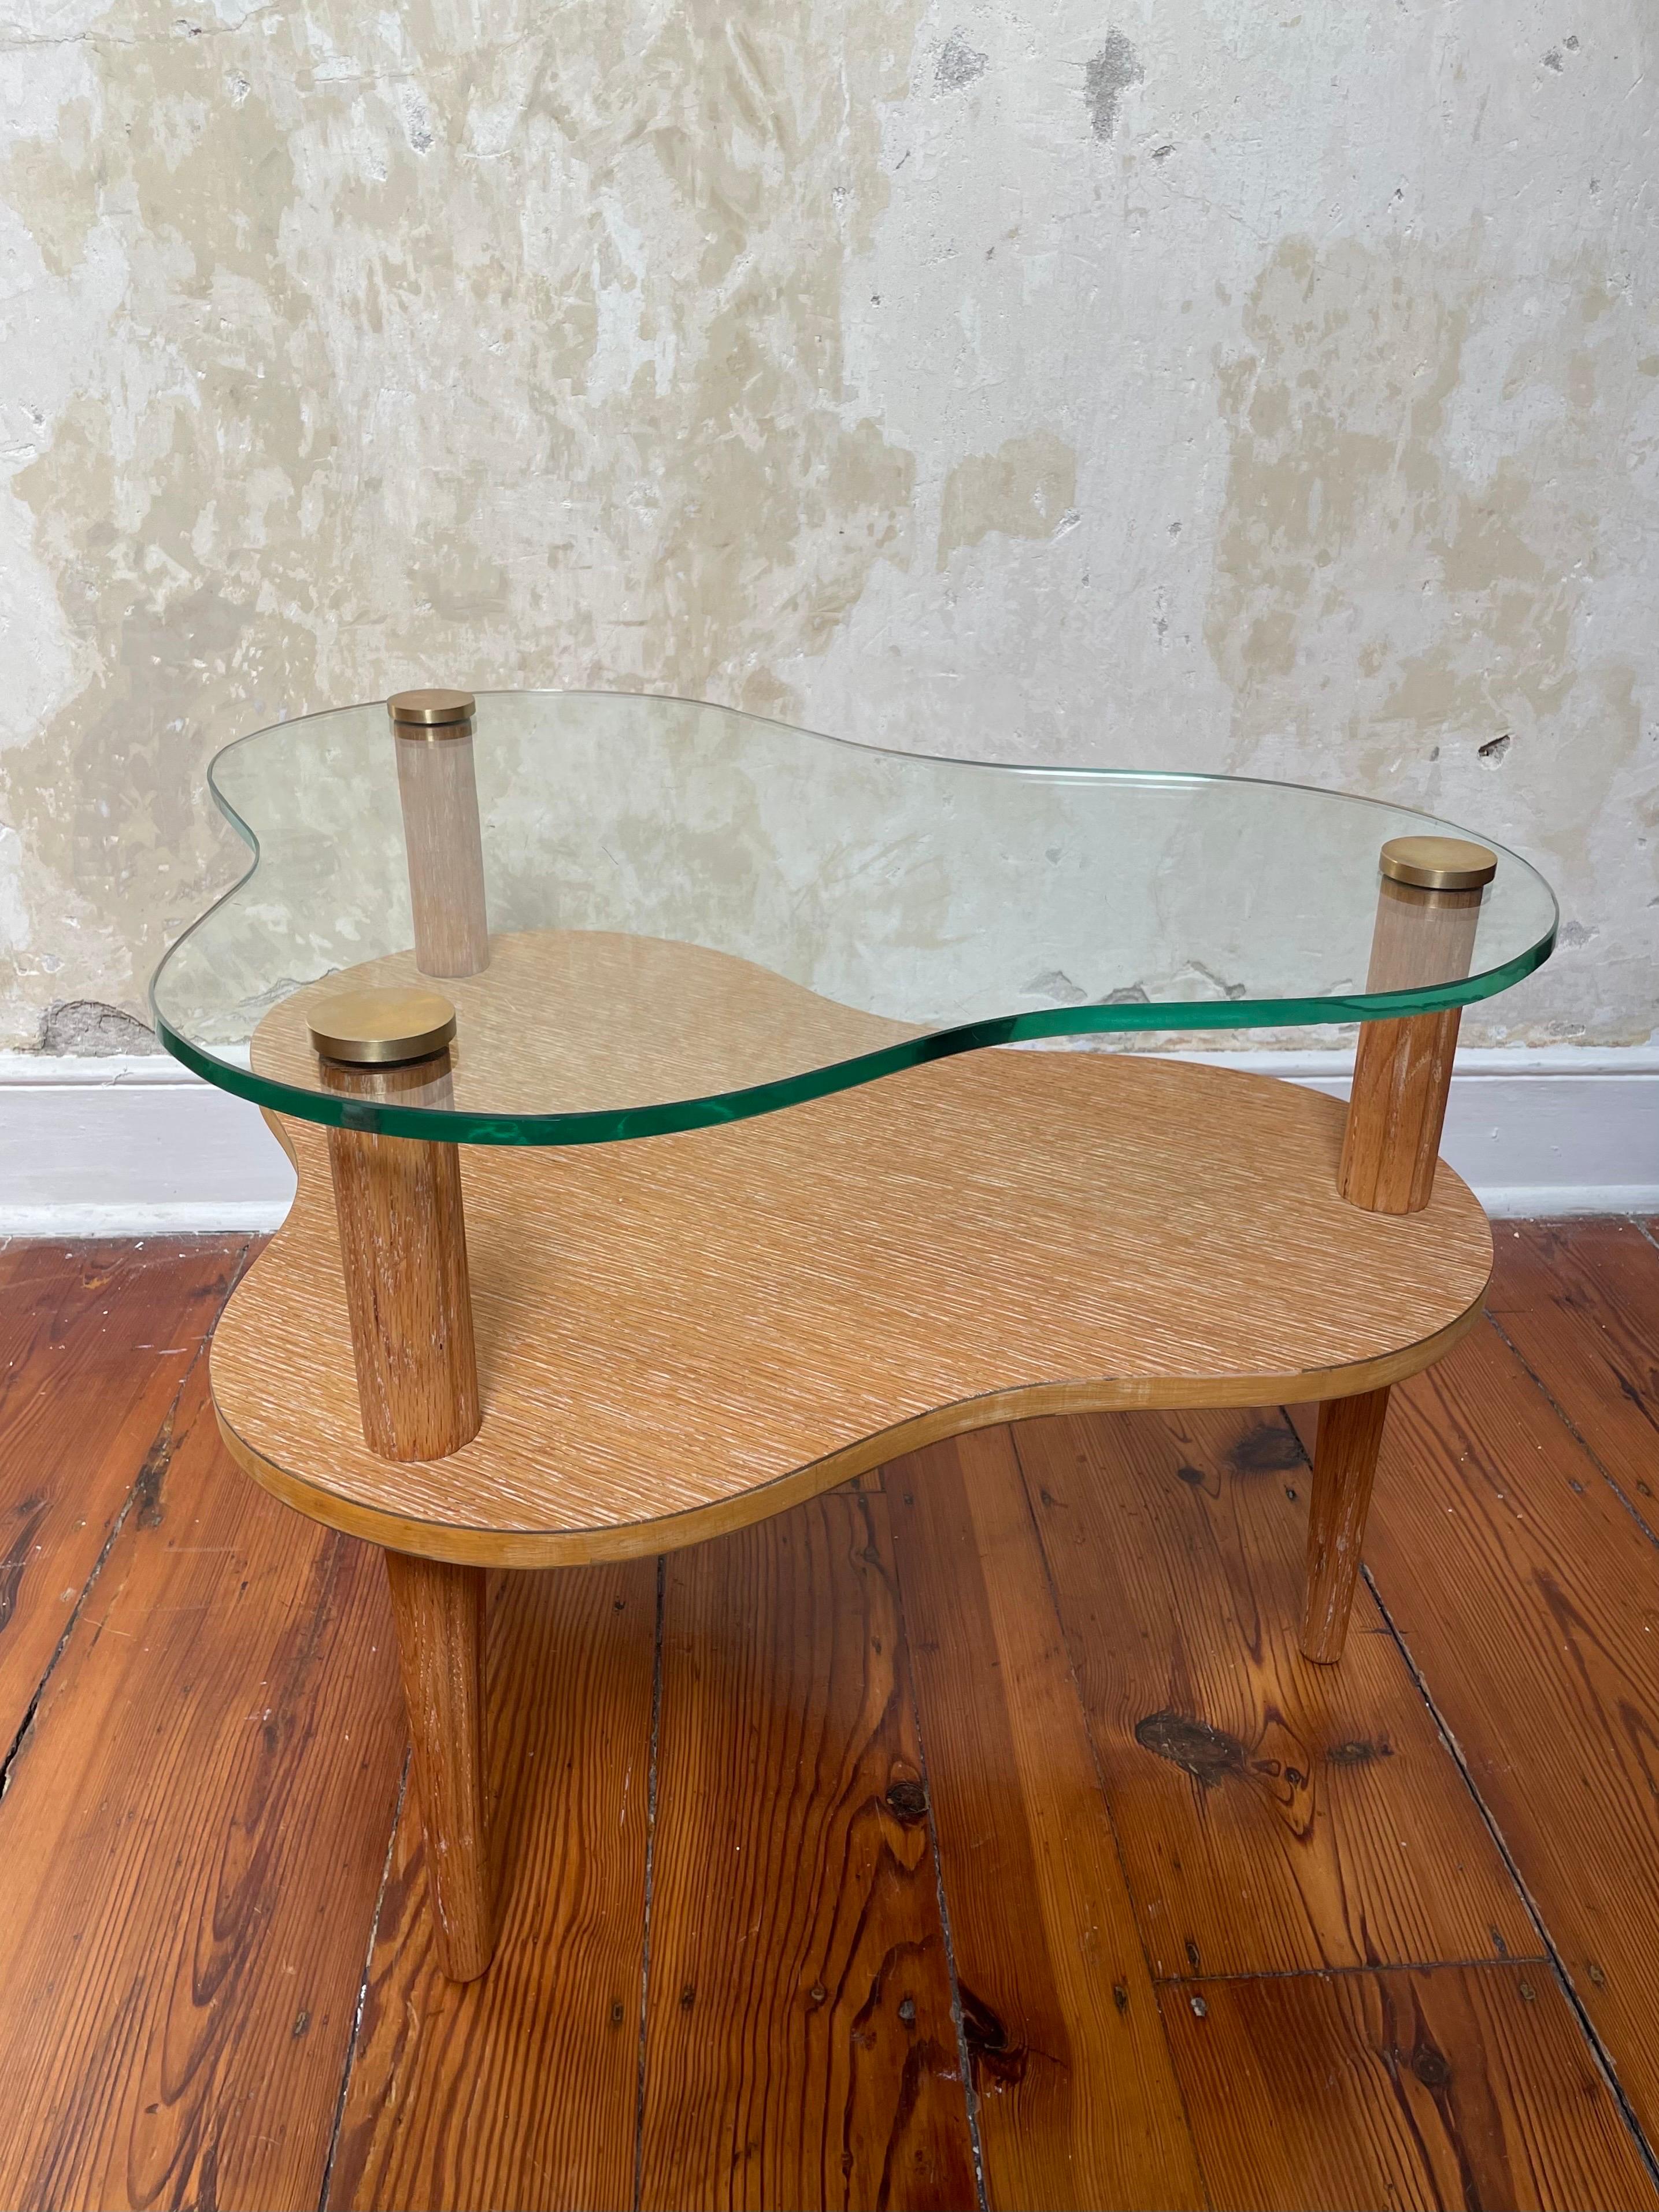 A glass and cerused oak 2 tier cloud shaped accent table with carved tripod legs and brass caps. Designed by Gilbert Rhode for Herman Miller for the early 1940s Paldao Group. The forms and materials of this line paid homage to the work of the